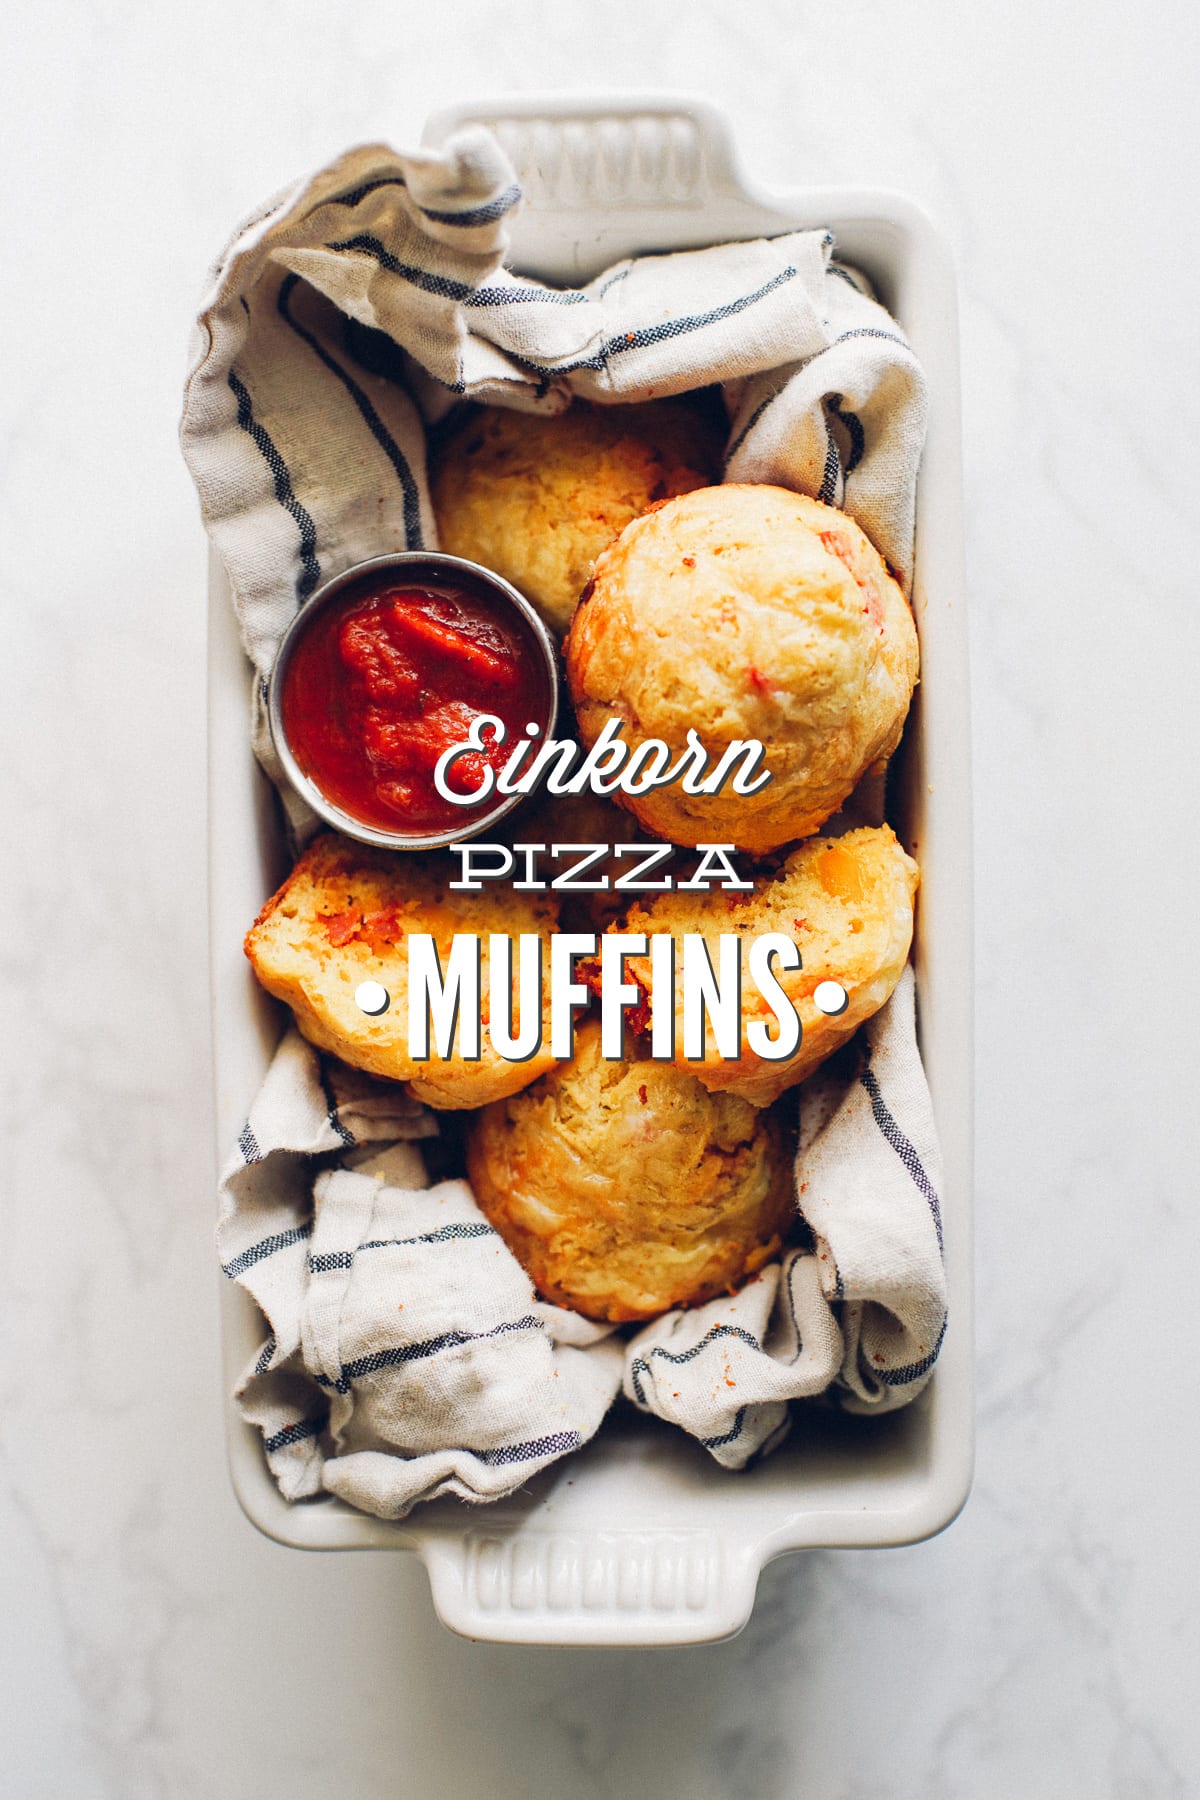 Einkorn Pizza Muffins: A Savory Make-Ahead Lunch or Snack